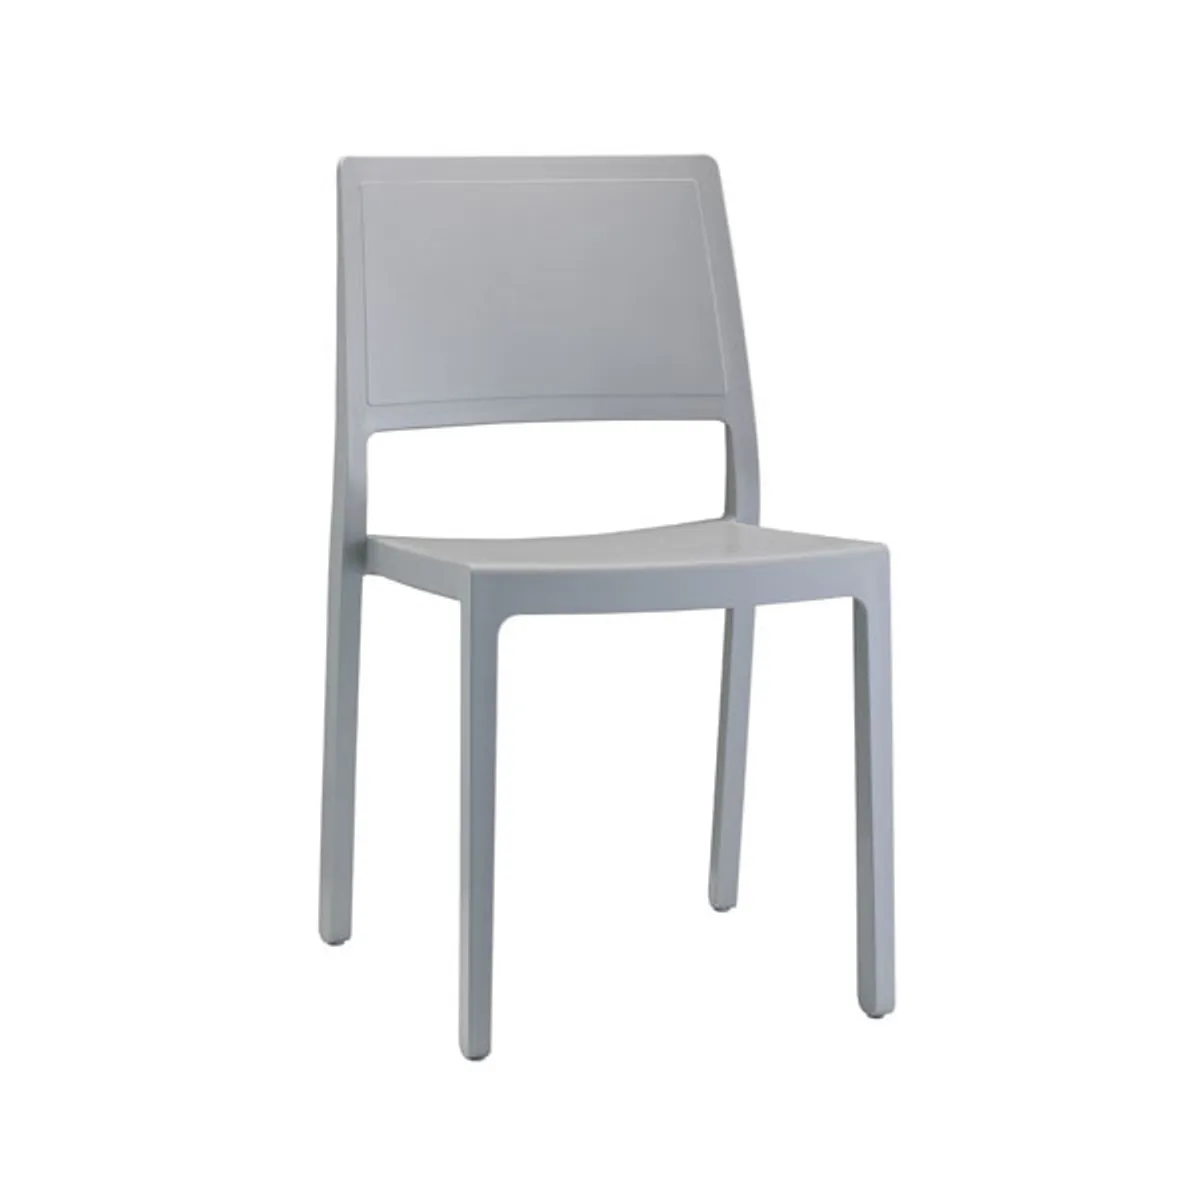 Remi side chair 10 Inside Out Contracts